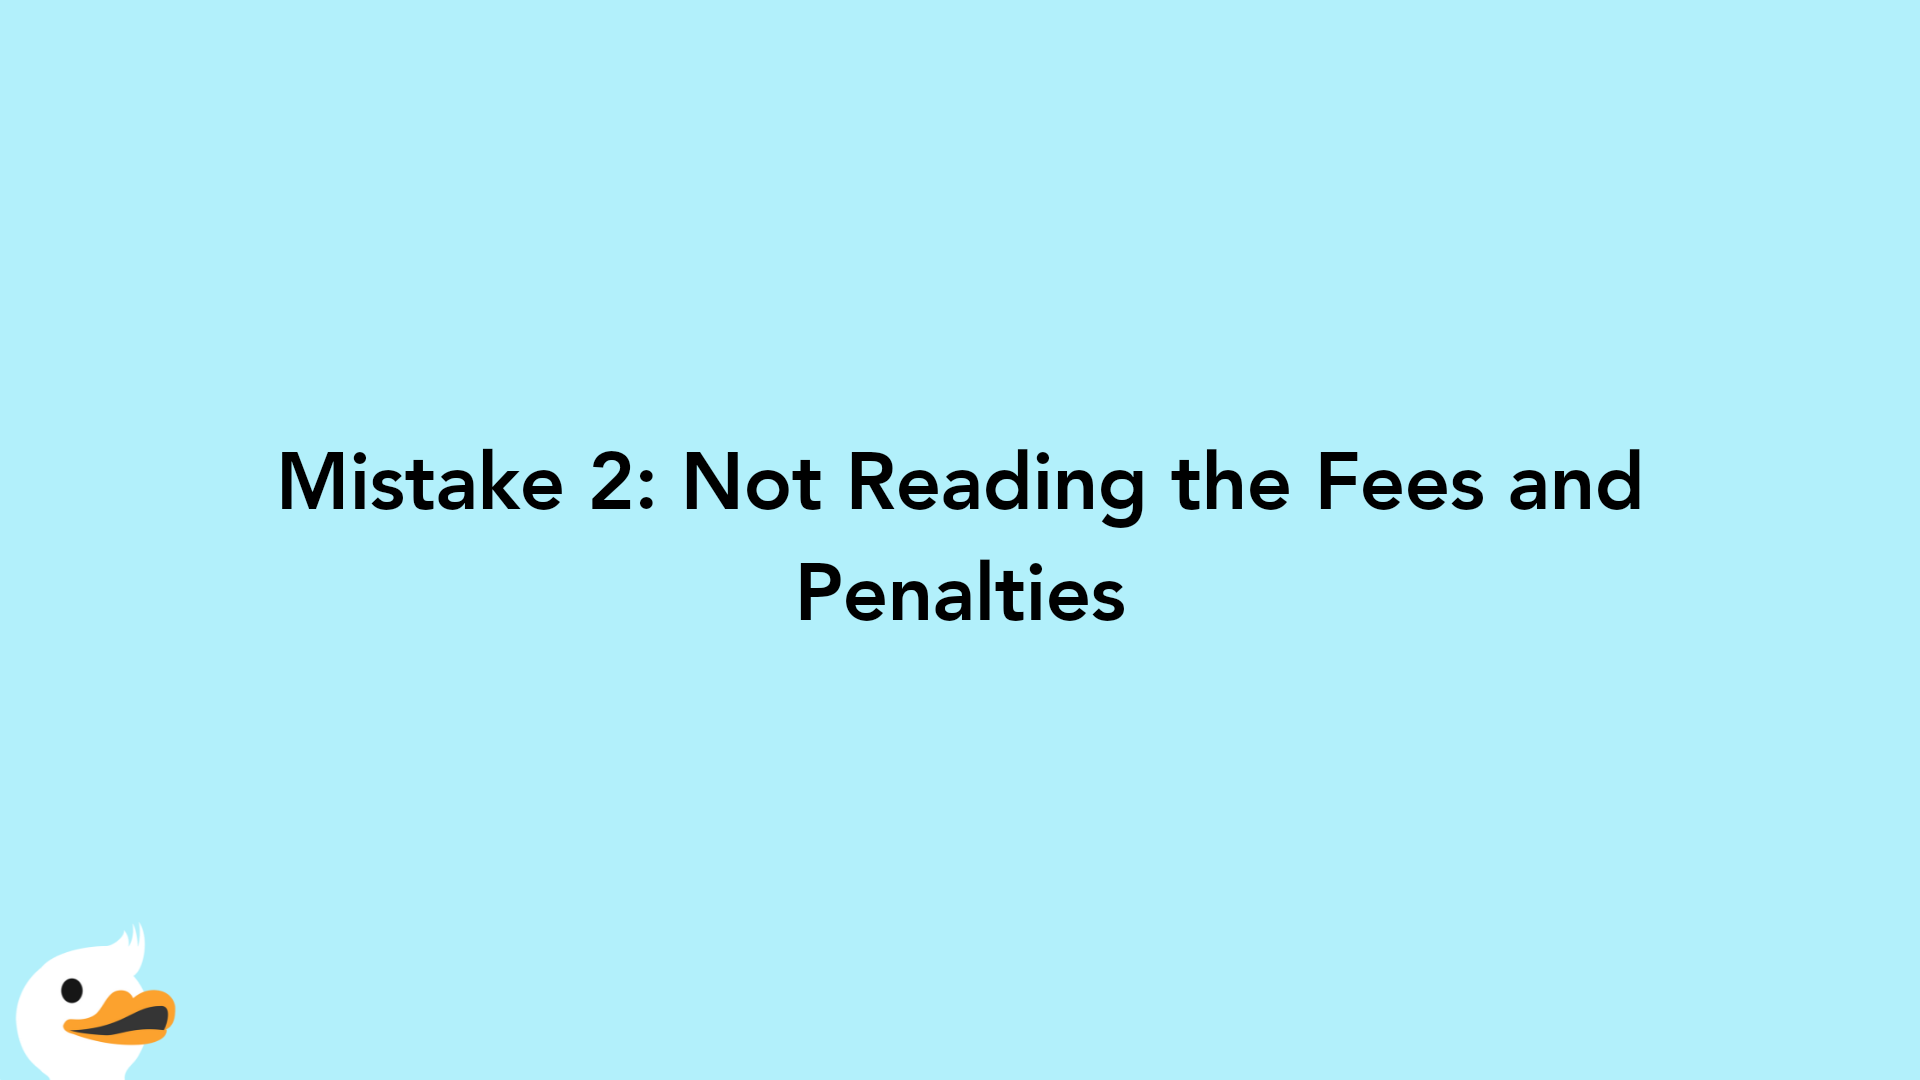 Mistake 2: Not Reading the Fees and Penalties